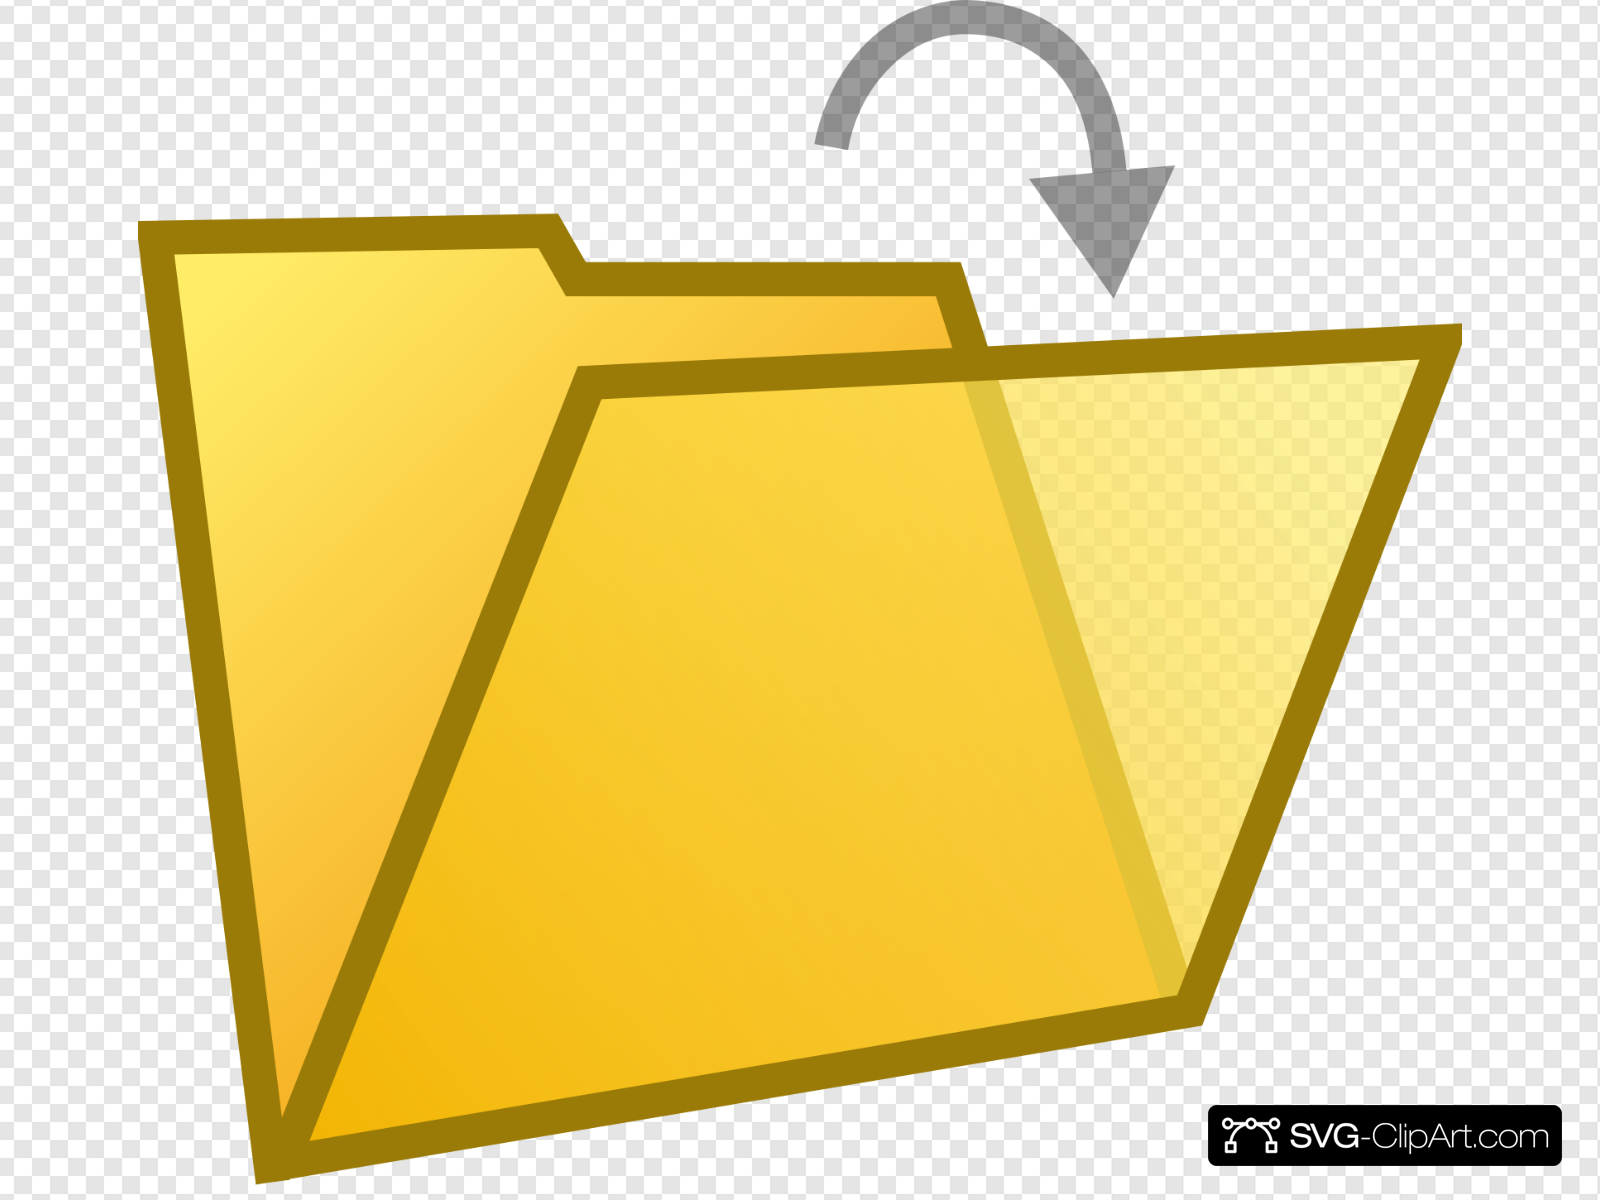 Open Clip art, Icon and SVG